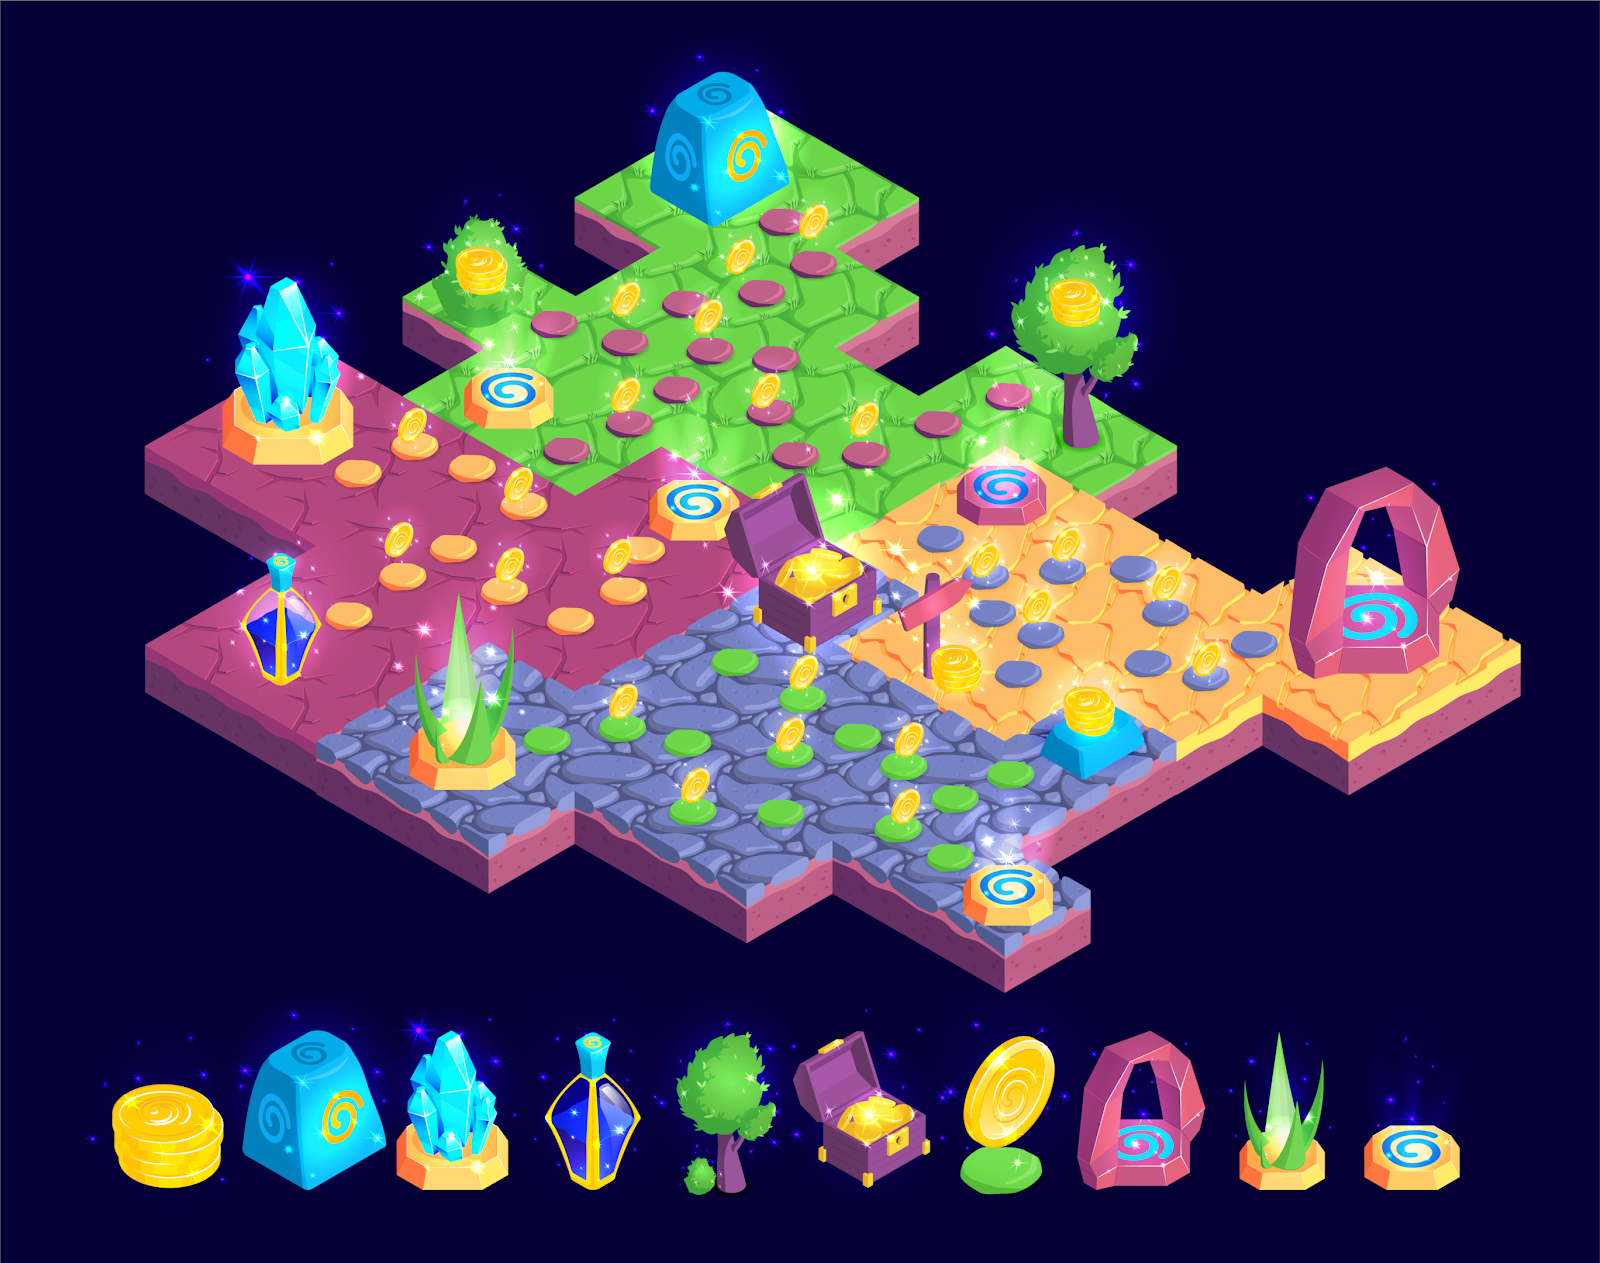 An image of a strategy games with other objects and different forms